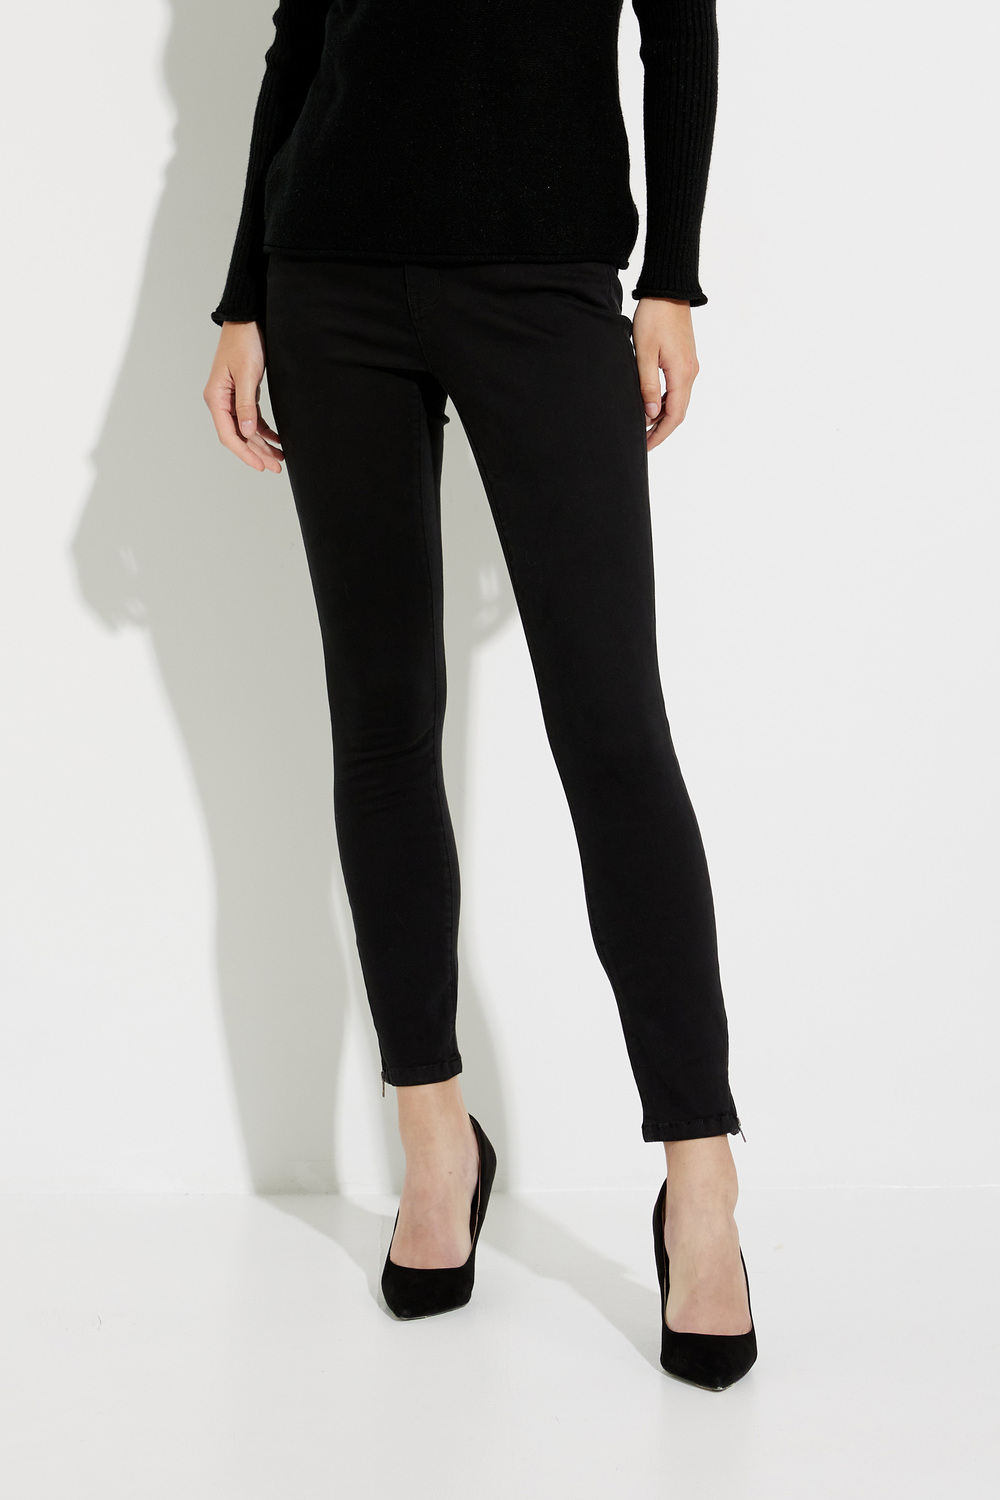 Ankle Twill Pants with Side Zipper Style C5233S. Black